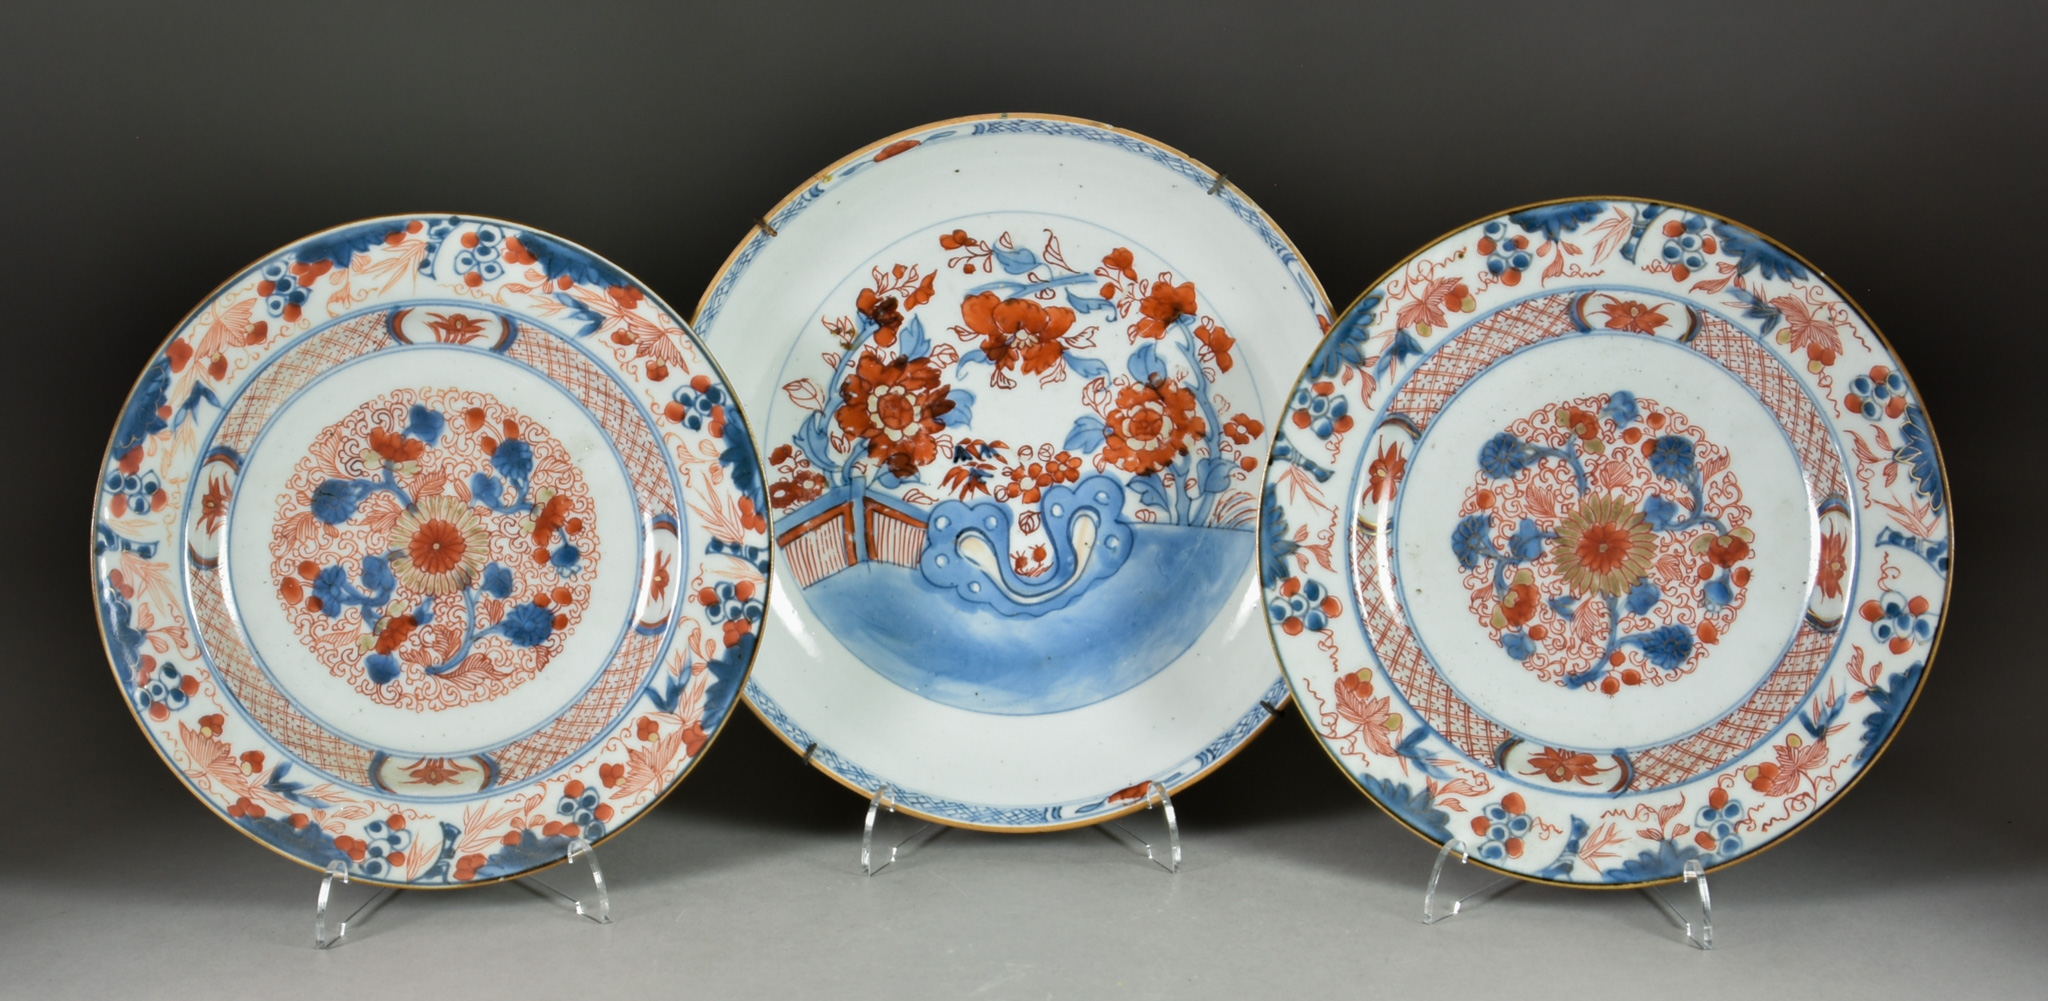 A Pair of Chinese Porcelain Circular Plates, 18th Century, painted in underglaze blue and